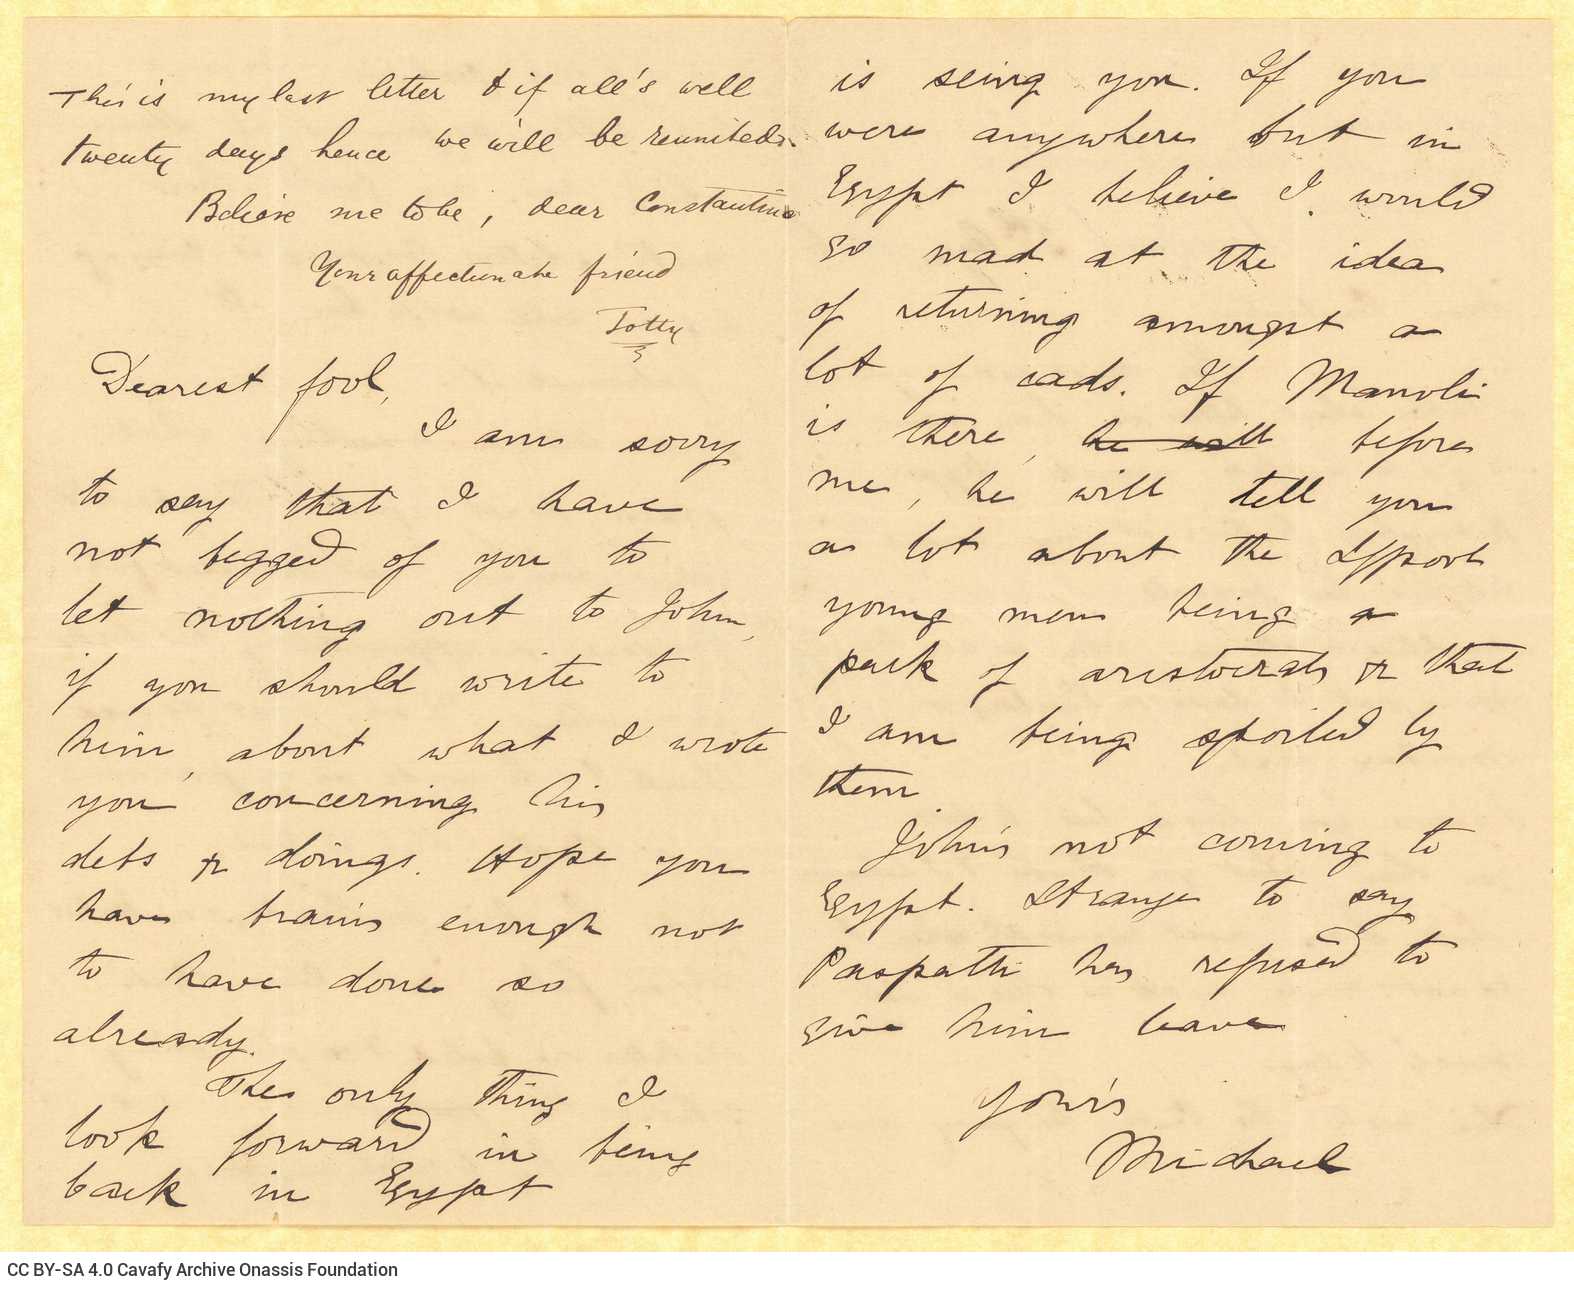 Handwritten letter by Totty and Mike Ralli to Cavafy in a bifolio, with notes on all sides. The letter is divided into two pa